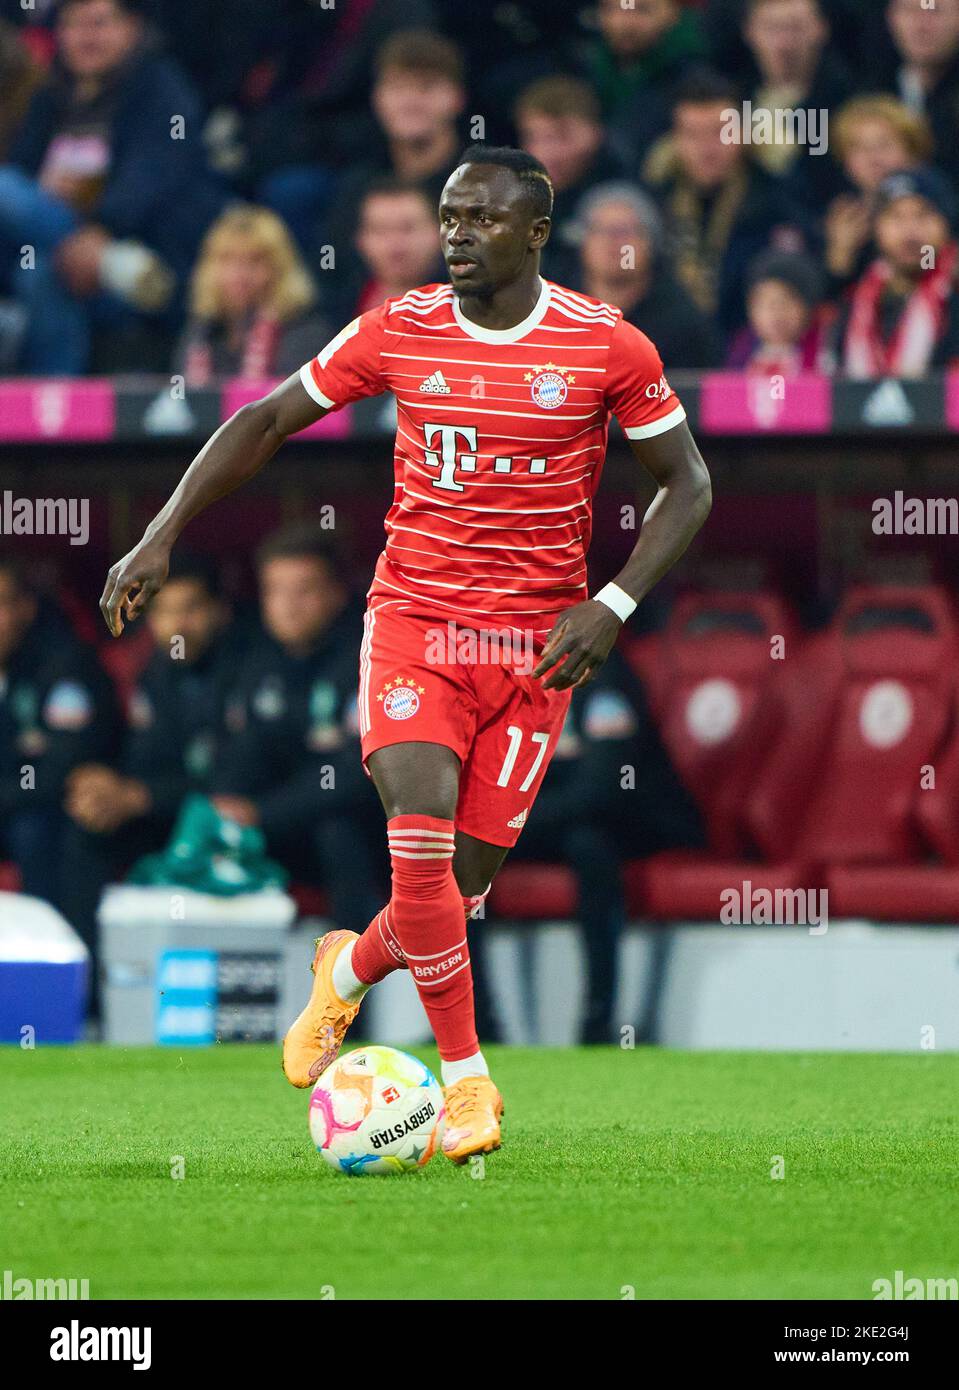 Sadio Mane (FCB 17)  in the match FC BAYERN MÜNCHEN - SV WERDER BREMEN 6-1 1.German Football League on Nov 8, 2022 in Munich, Germany. Season 2022/2023, matchday 14, 1.Bundesliga, FCB, München, 14.Spieltag © Peter Schatz / Alamy Live News    - DFL REGULATIONS PROHIBIT ANY USE OF PHOTOGRAPHS as IMAGE SEQUENCES and/or QUASI-VIDEO - Stock Photo